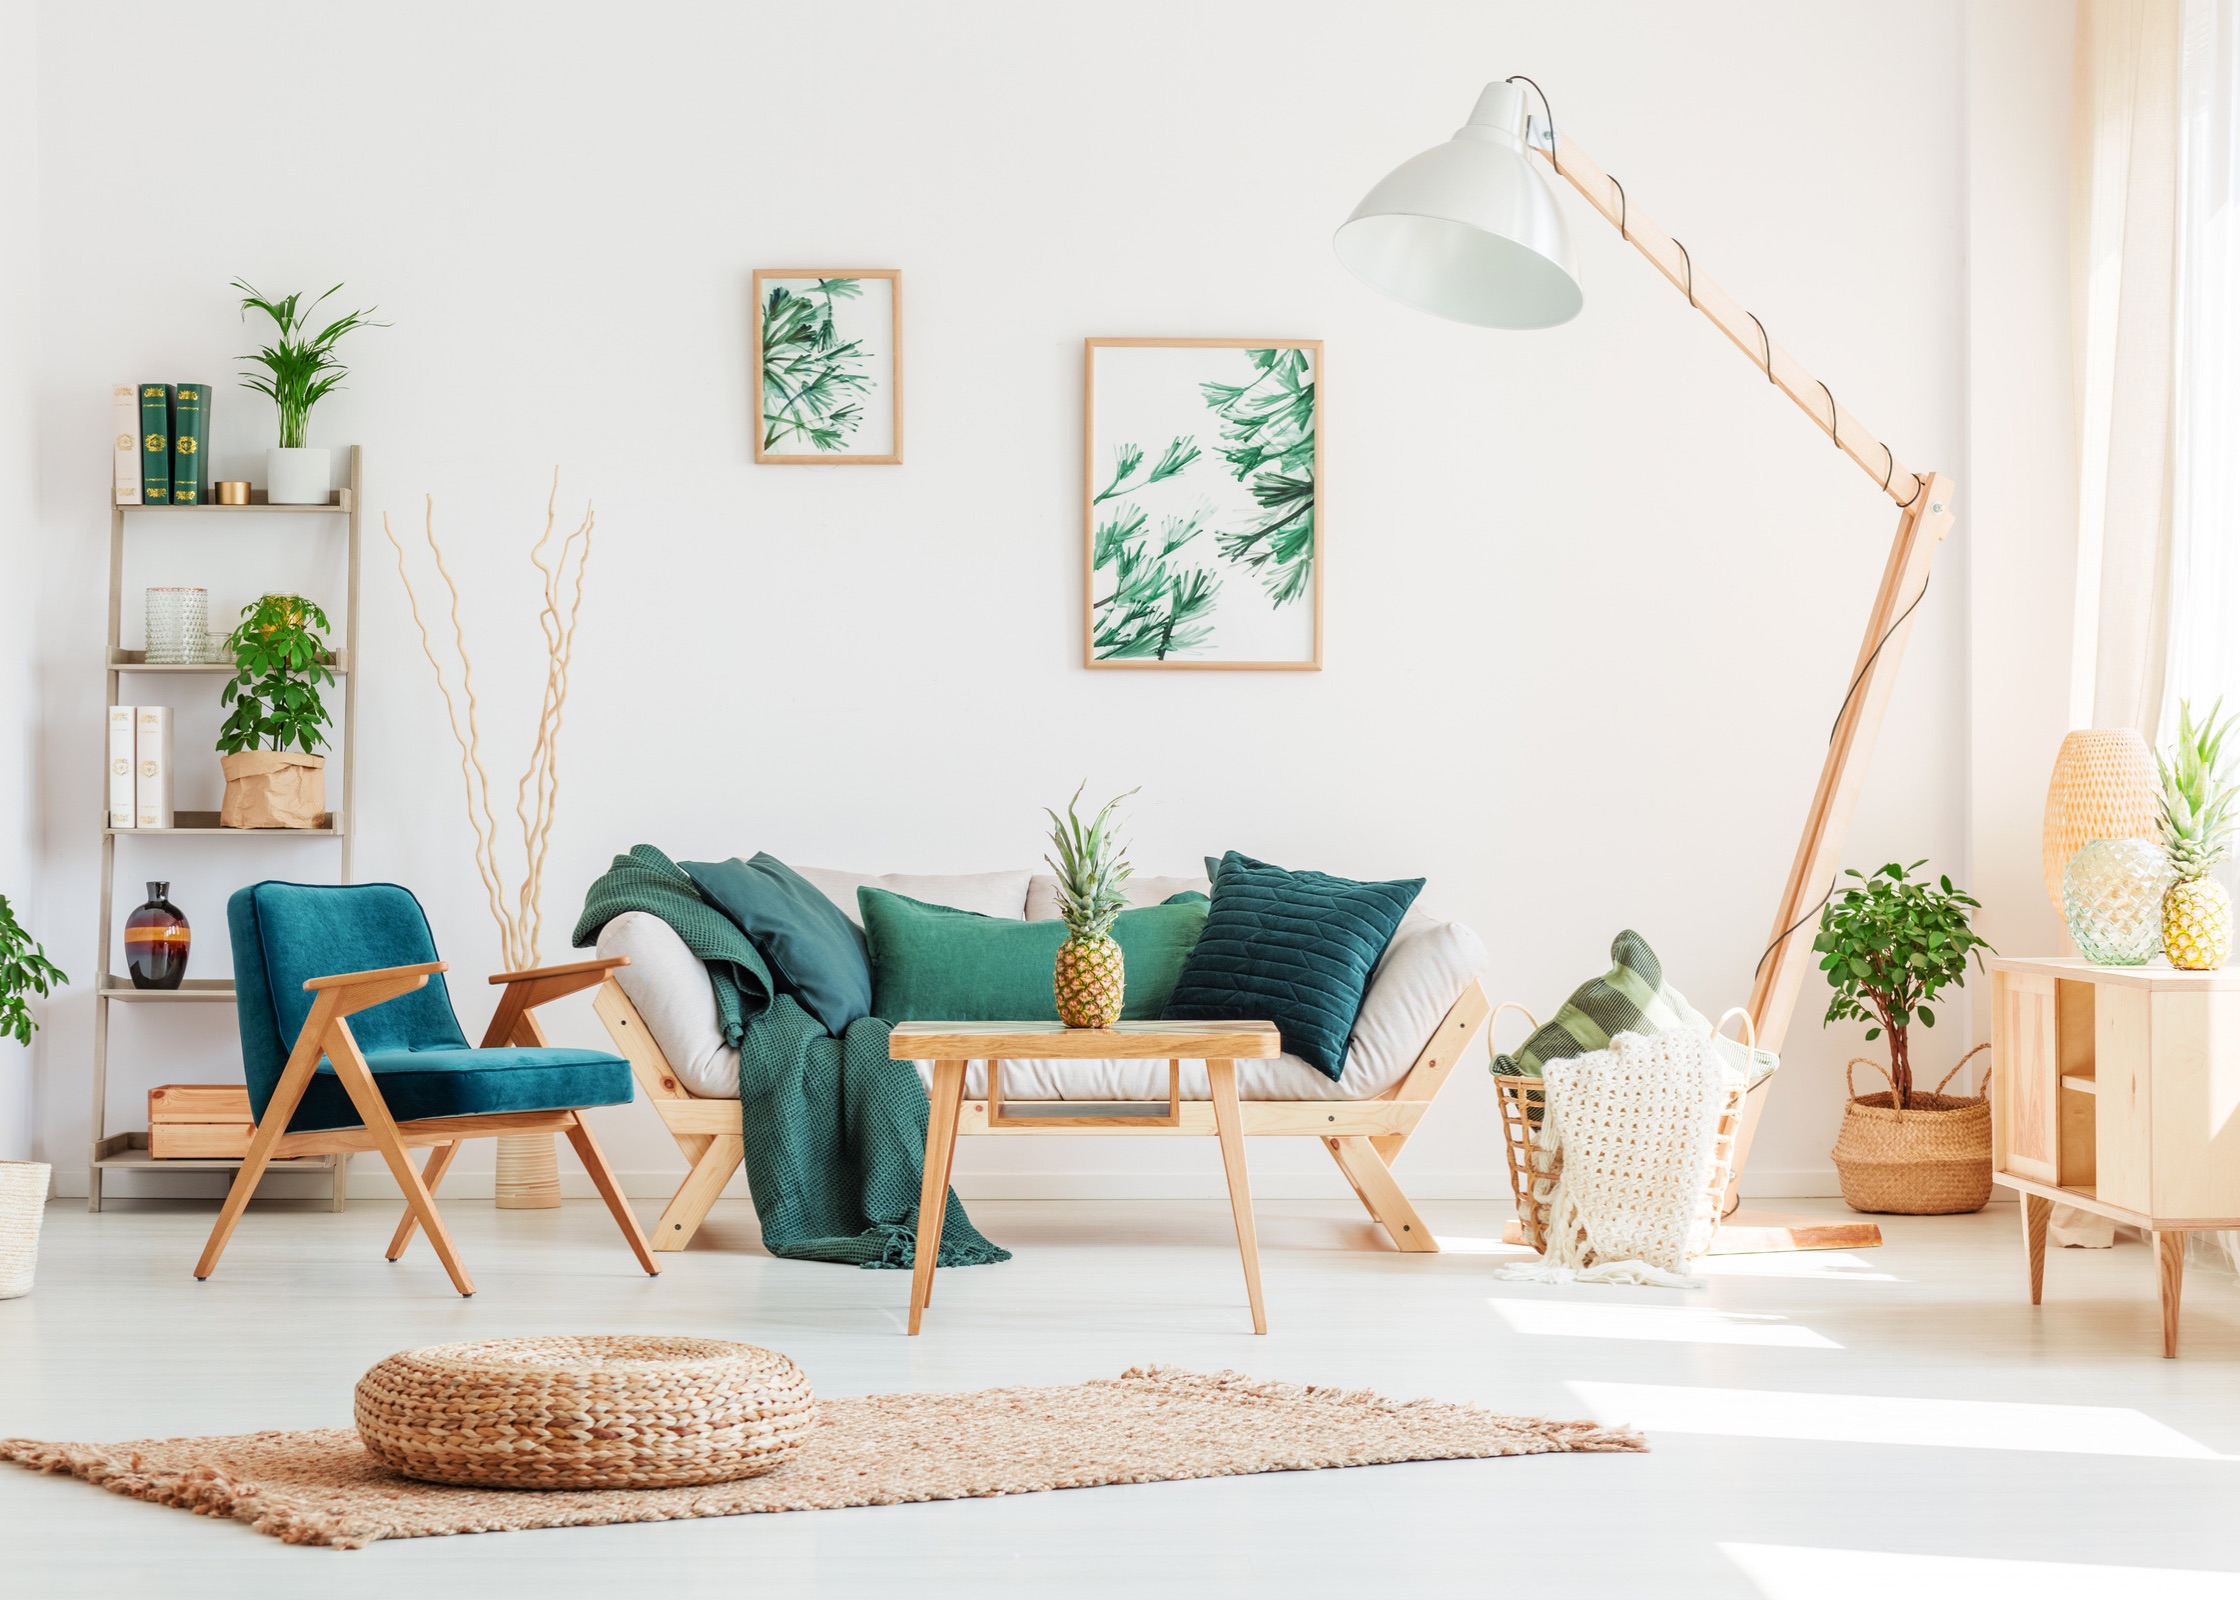 add pops of color for spring. Spring decor ideas. decorating for spring. decor for spring. How to update your home for spring. resfresh home. get home spring ready. how to transition your home from winter to spring